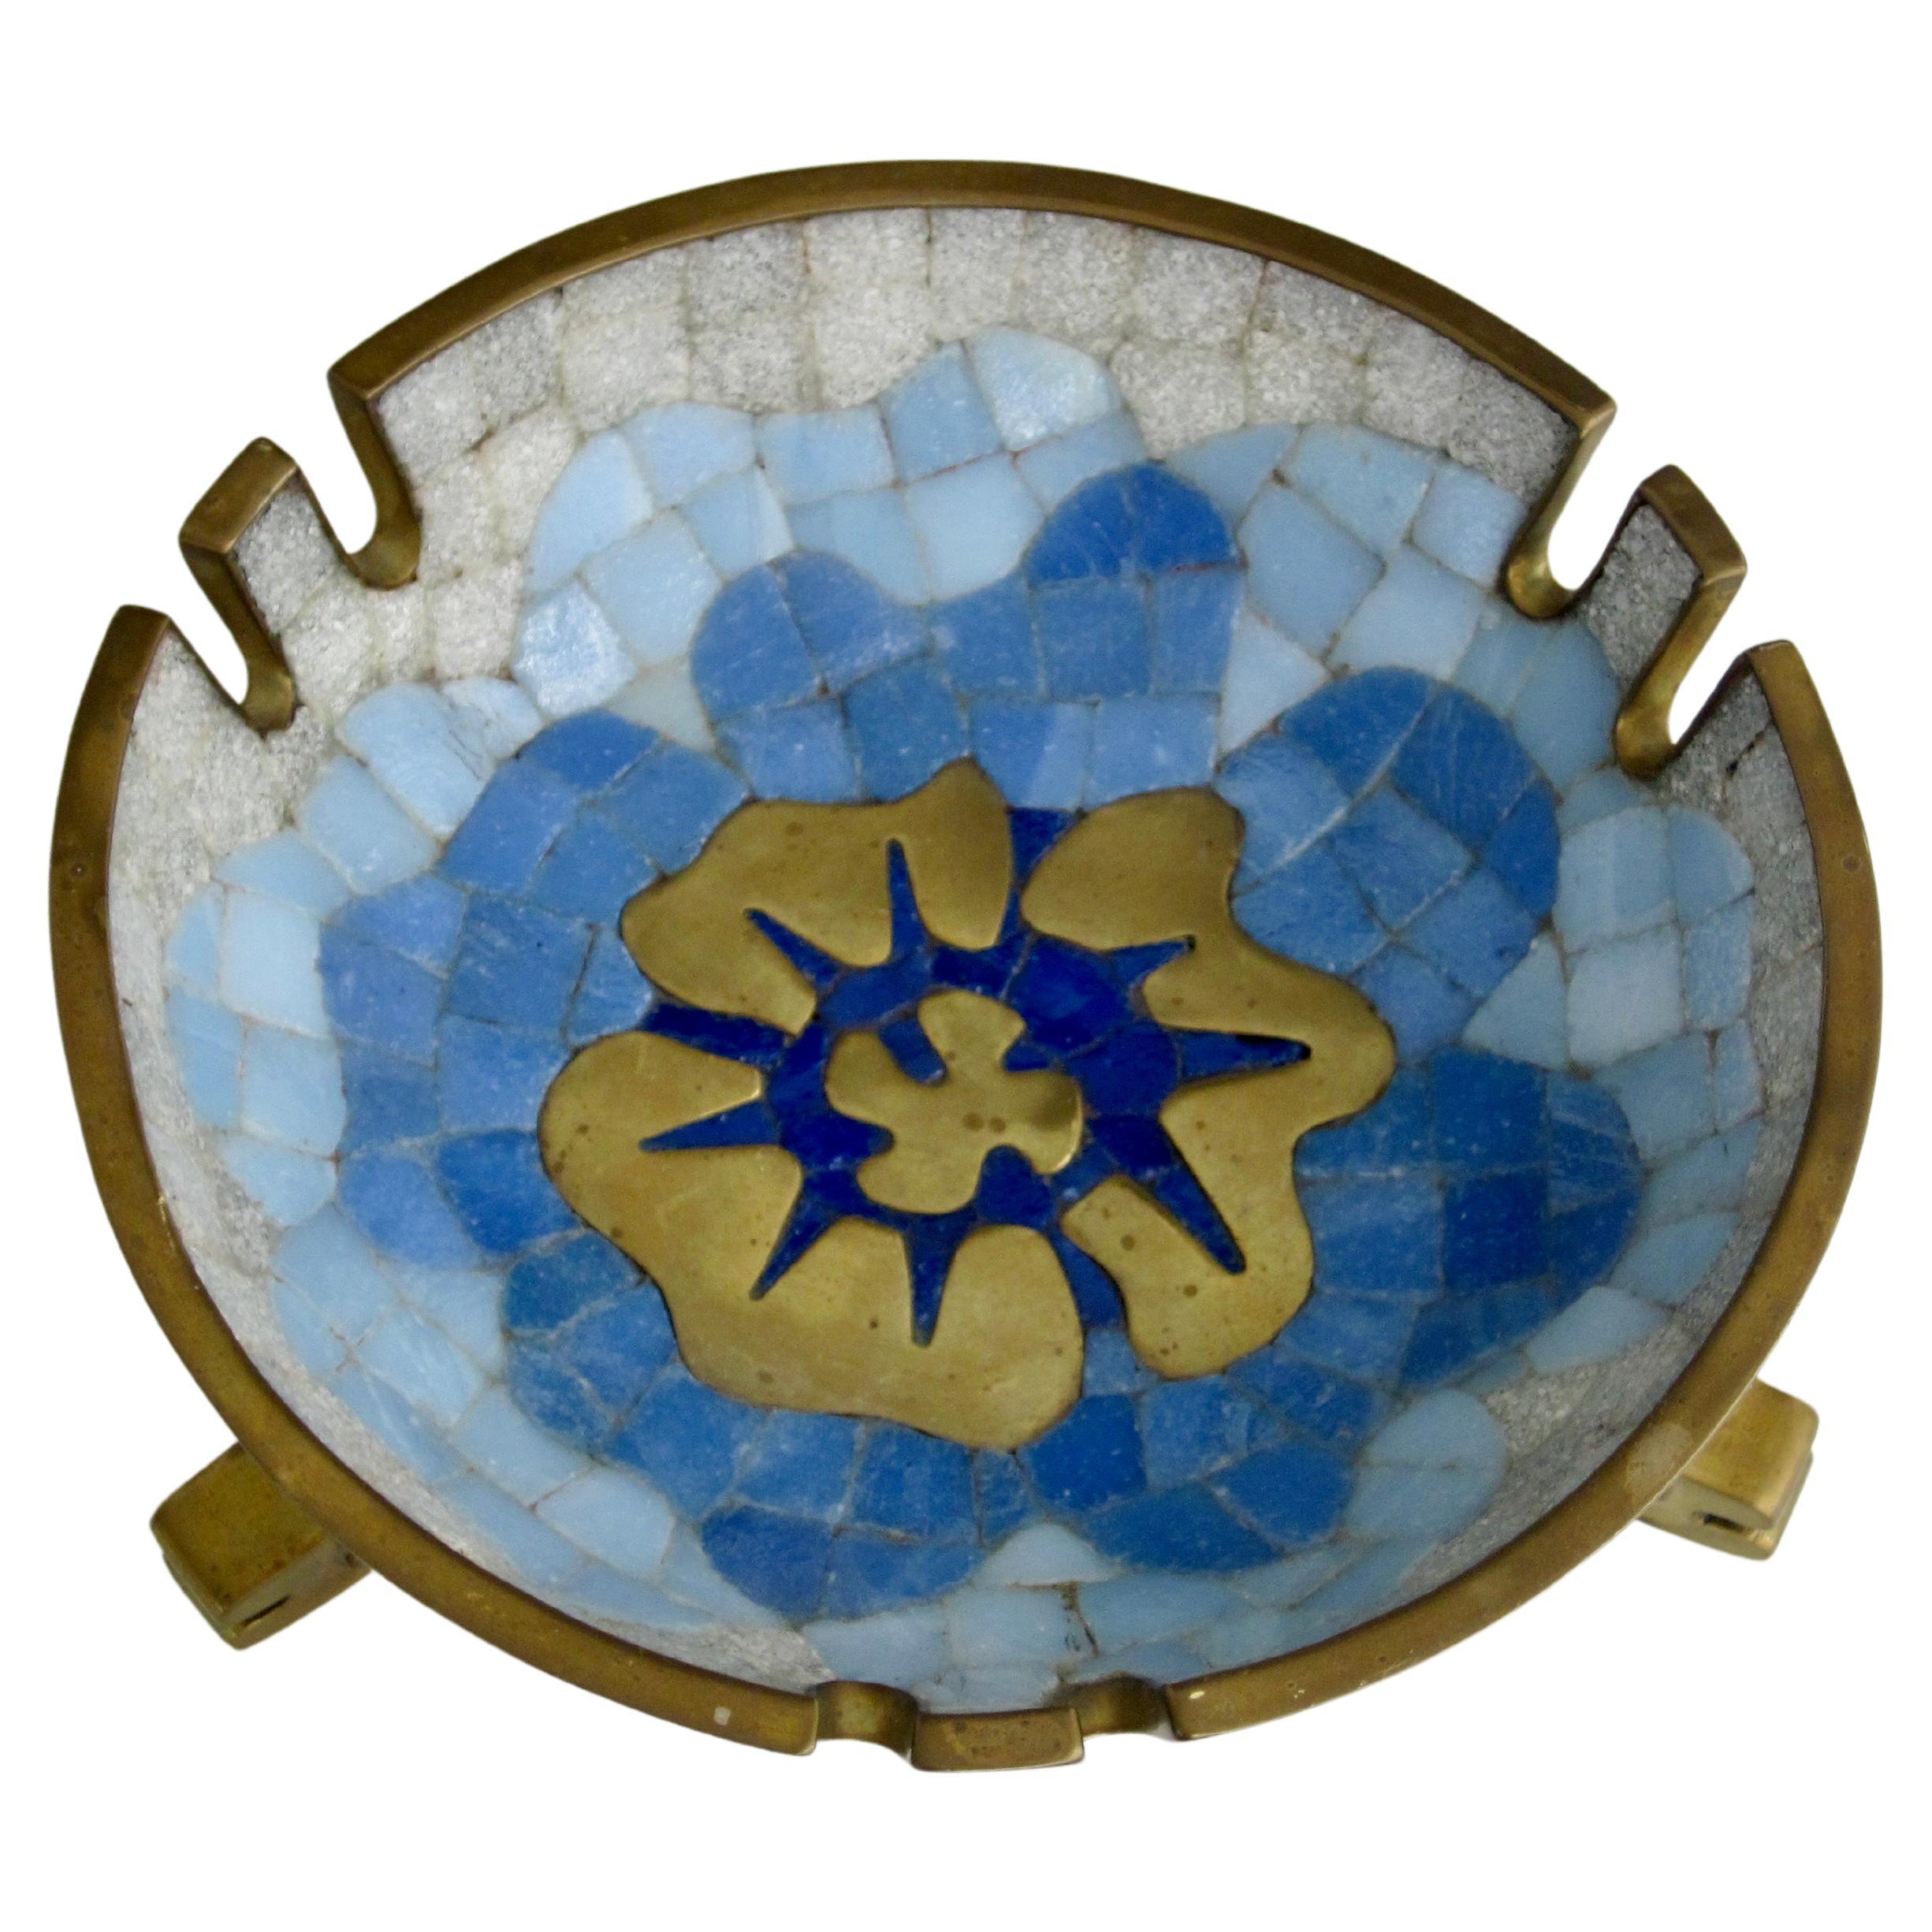 Blue and white hand cut tiles with poured brass create a flower centric look to this 1950s Salvador Teran mosaic and brass ashtray. I like the feminine feel of the soft rounded edges of the tile and poured brass and the masculine brass edging that